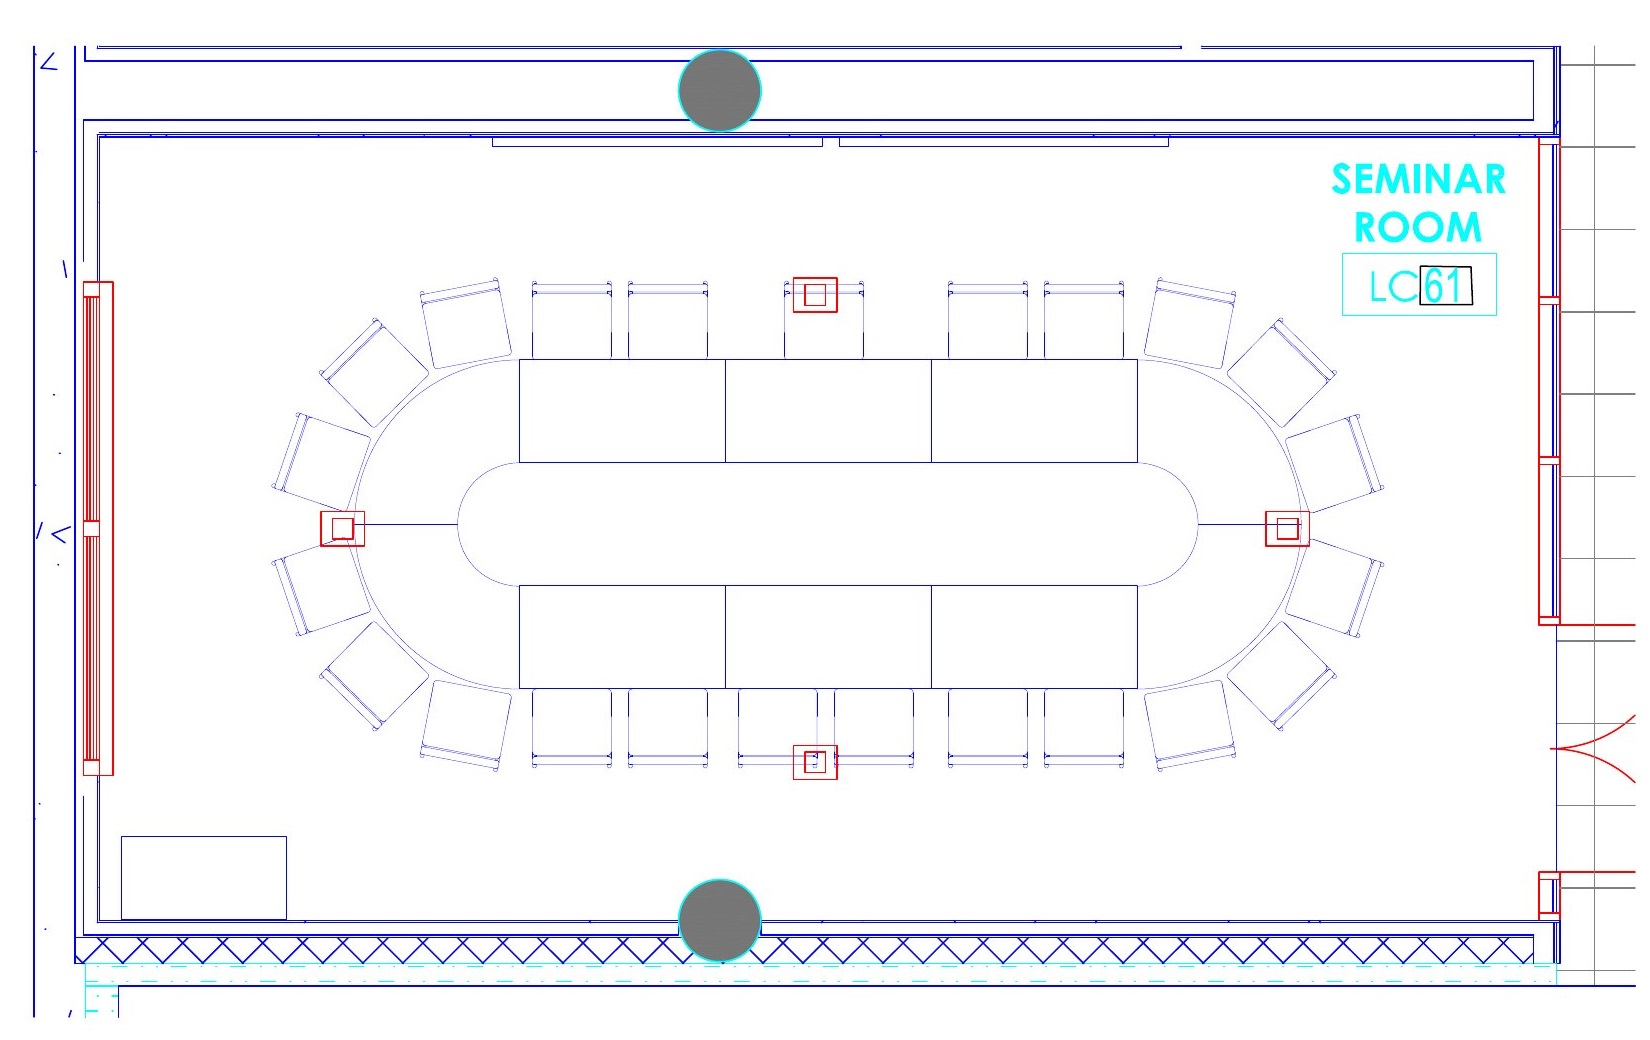 Seating chart for Kravis LC61